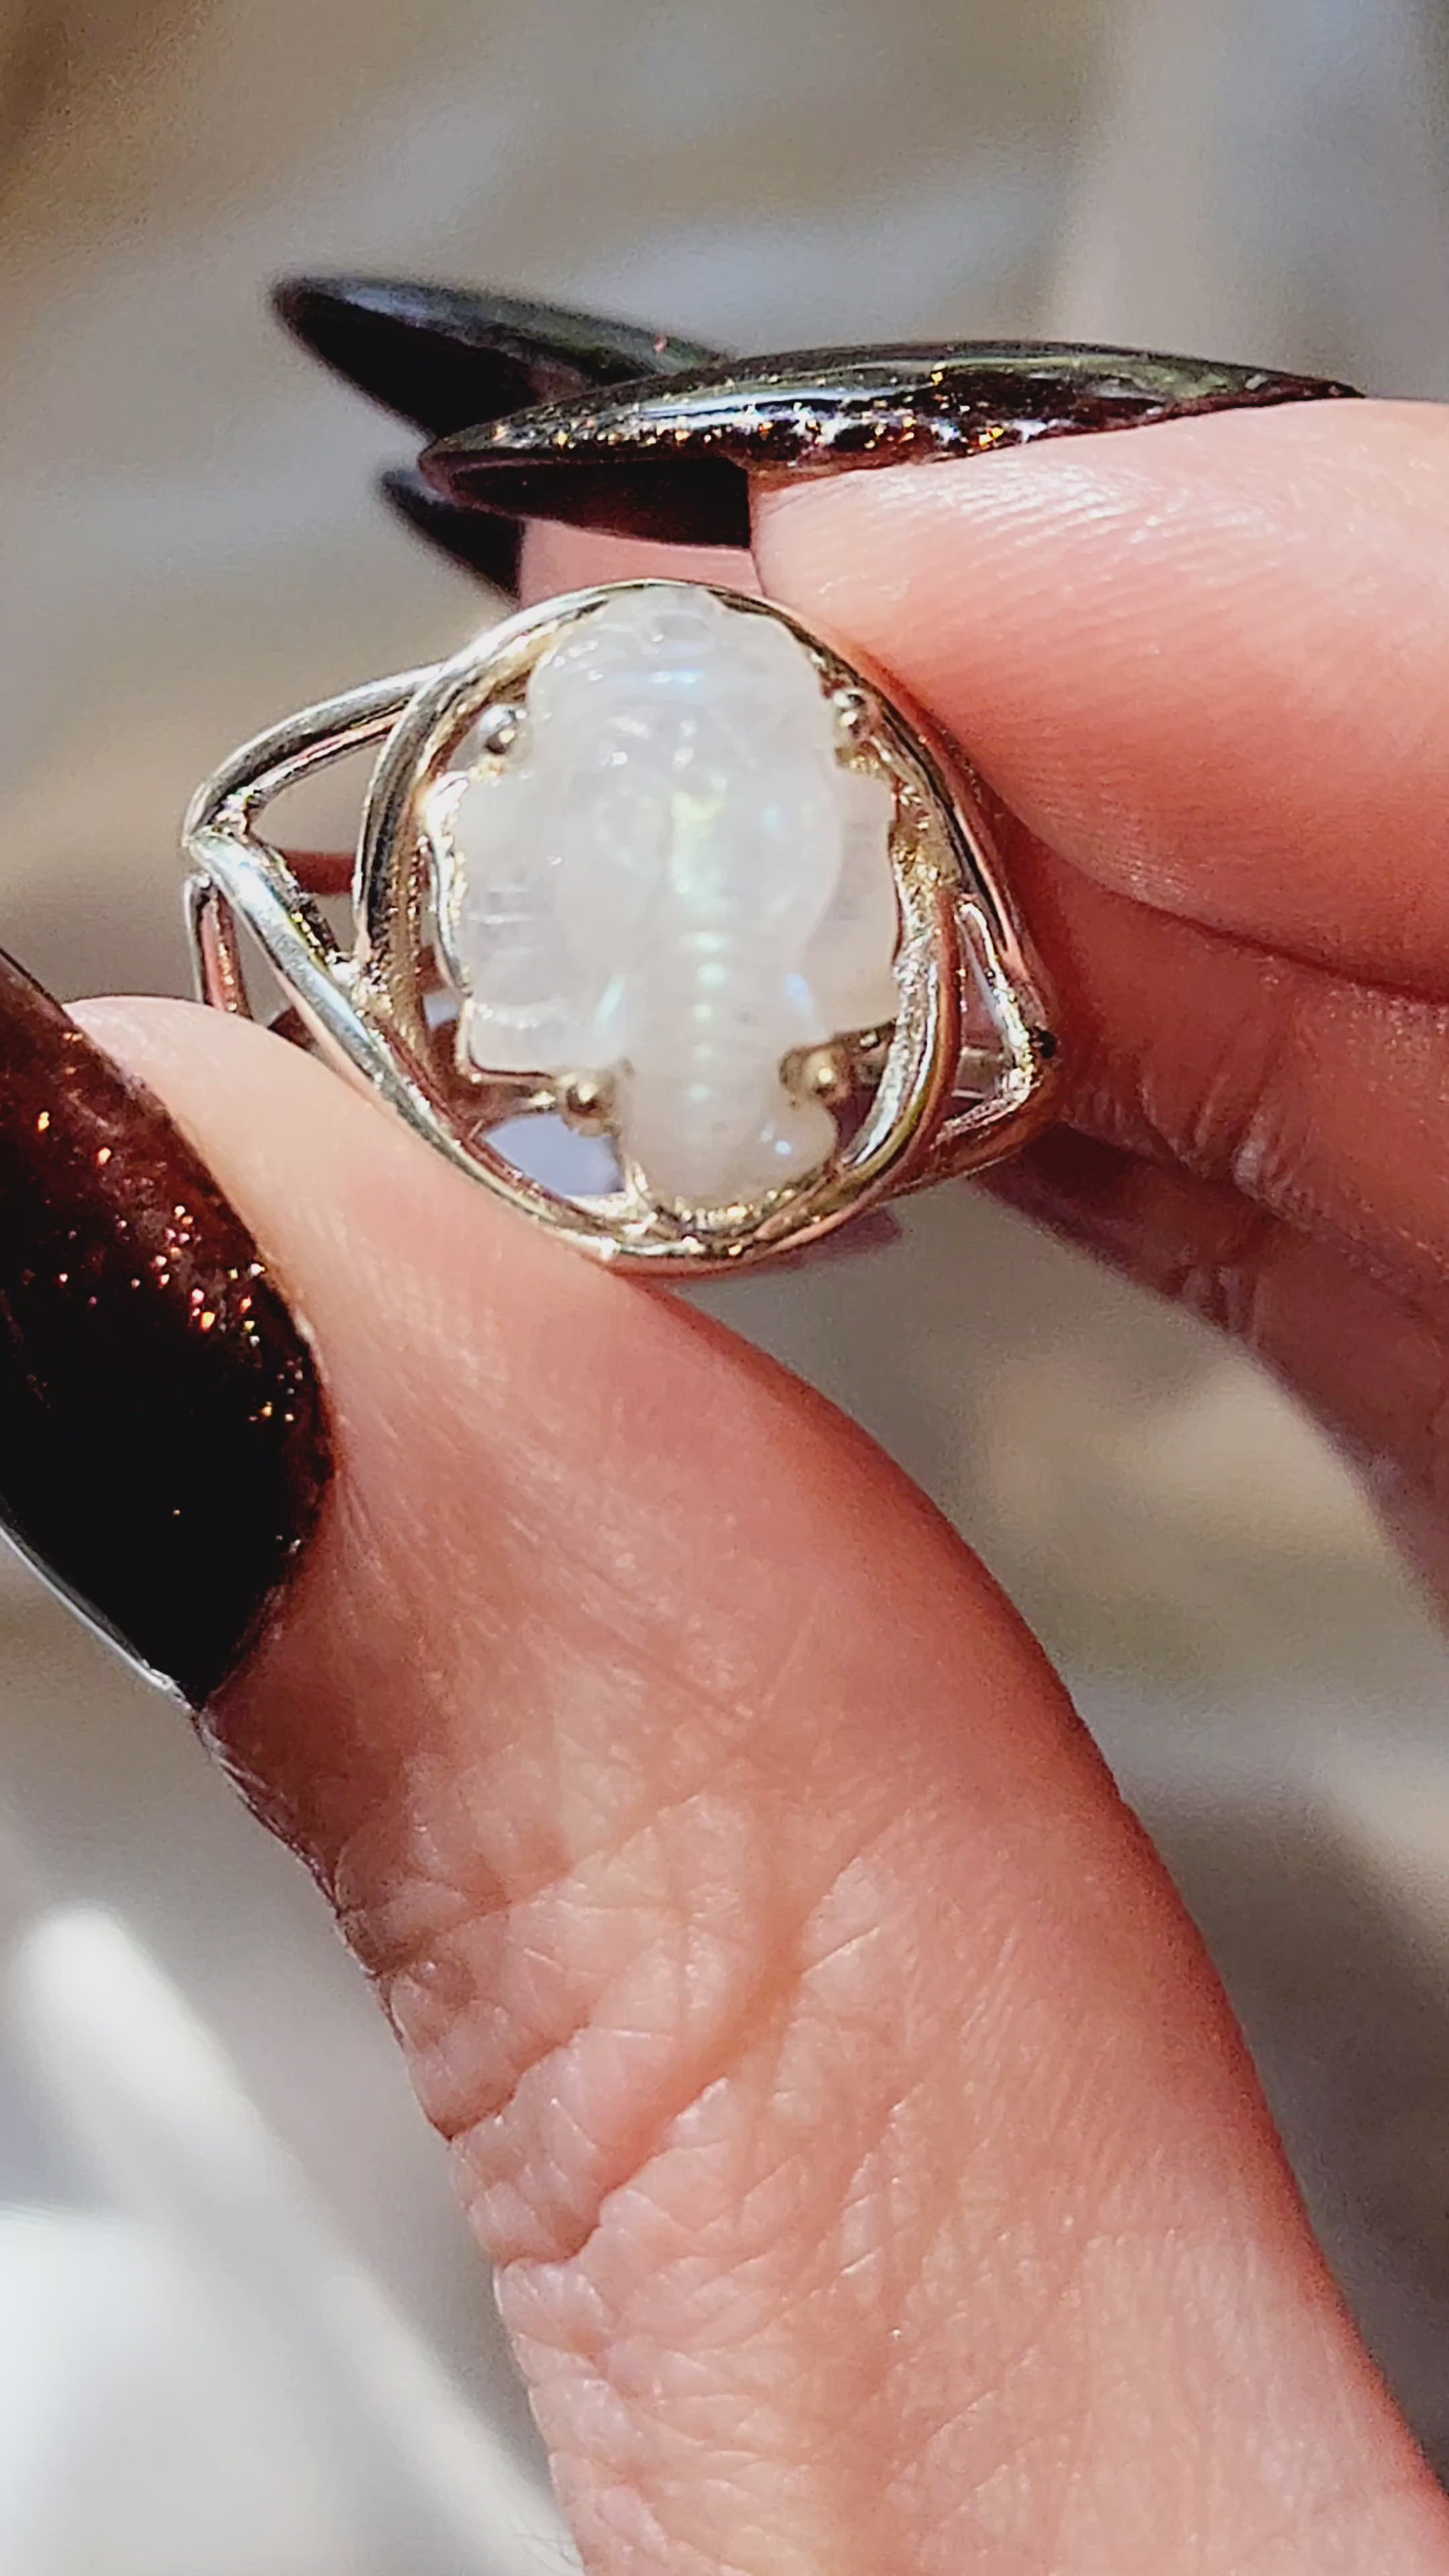 Rainbow Moonstone Ganesha Finger Cuff Adjustable Ring .925 Sterling Silver for New Beginnings & Clearing Blockages